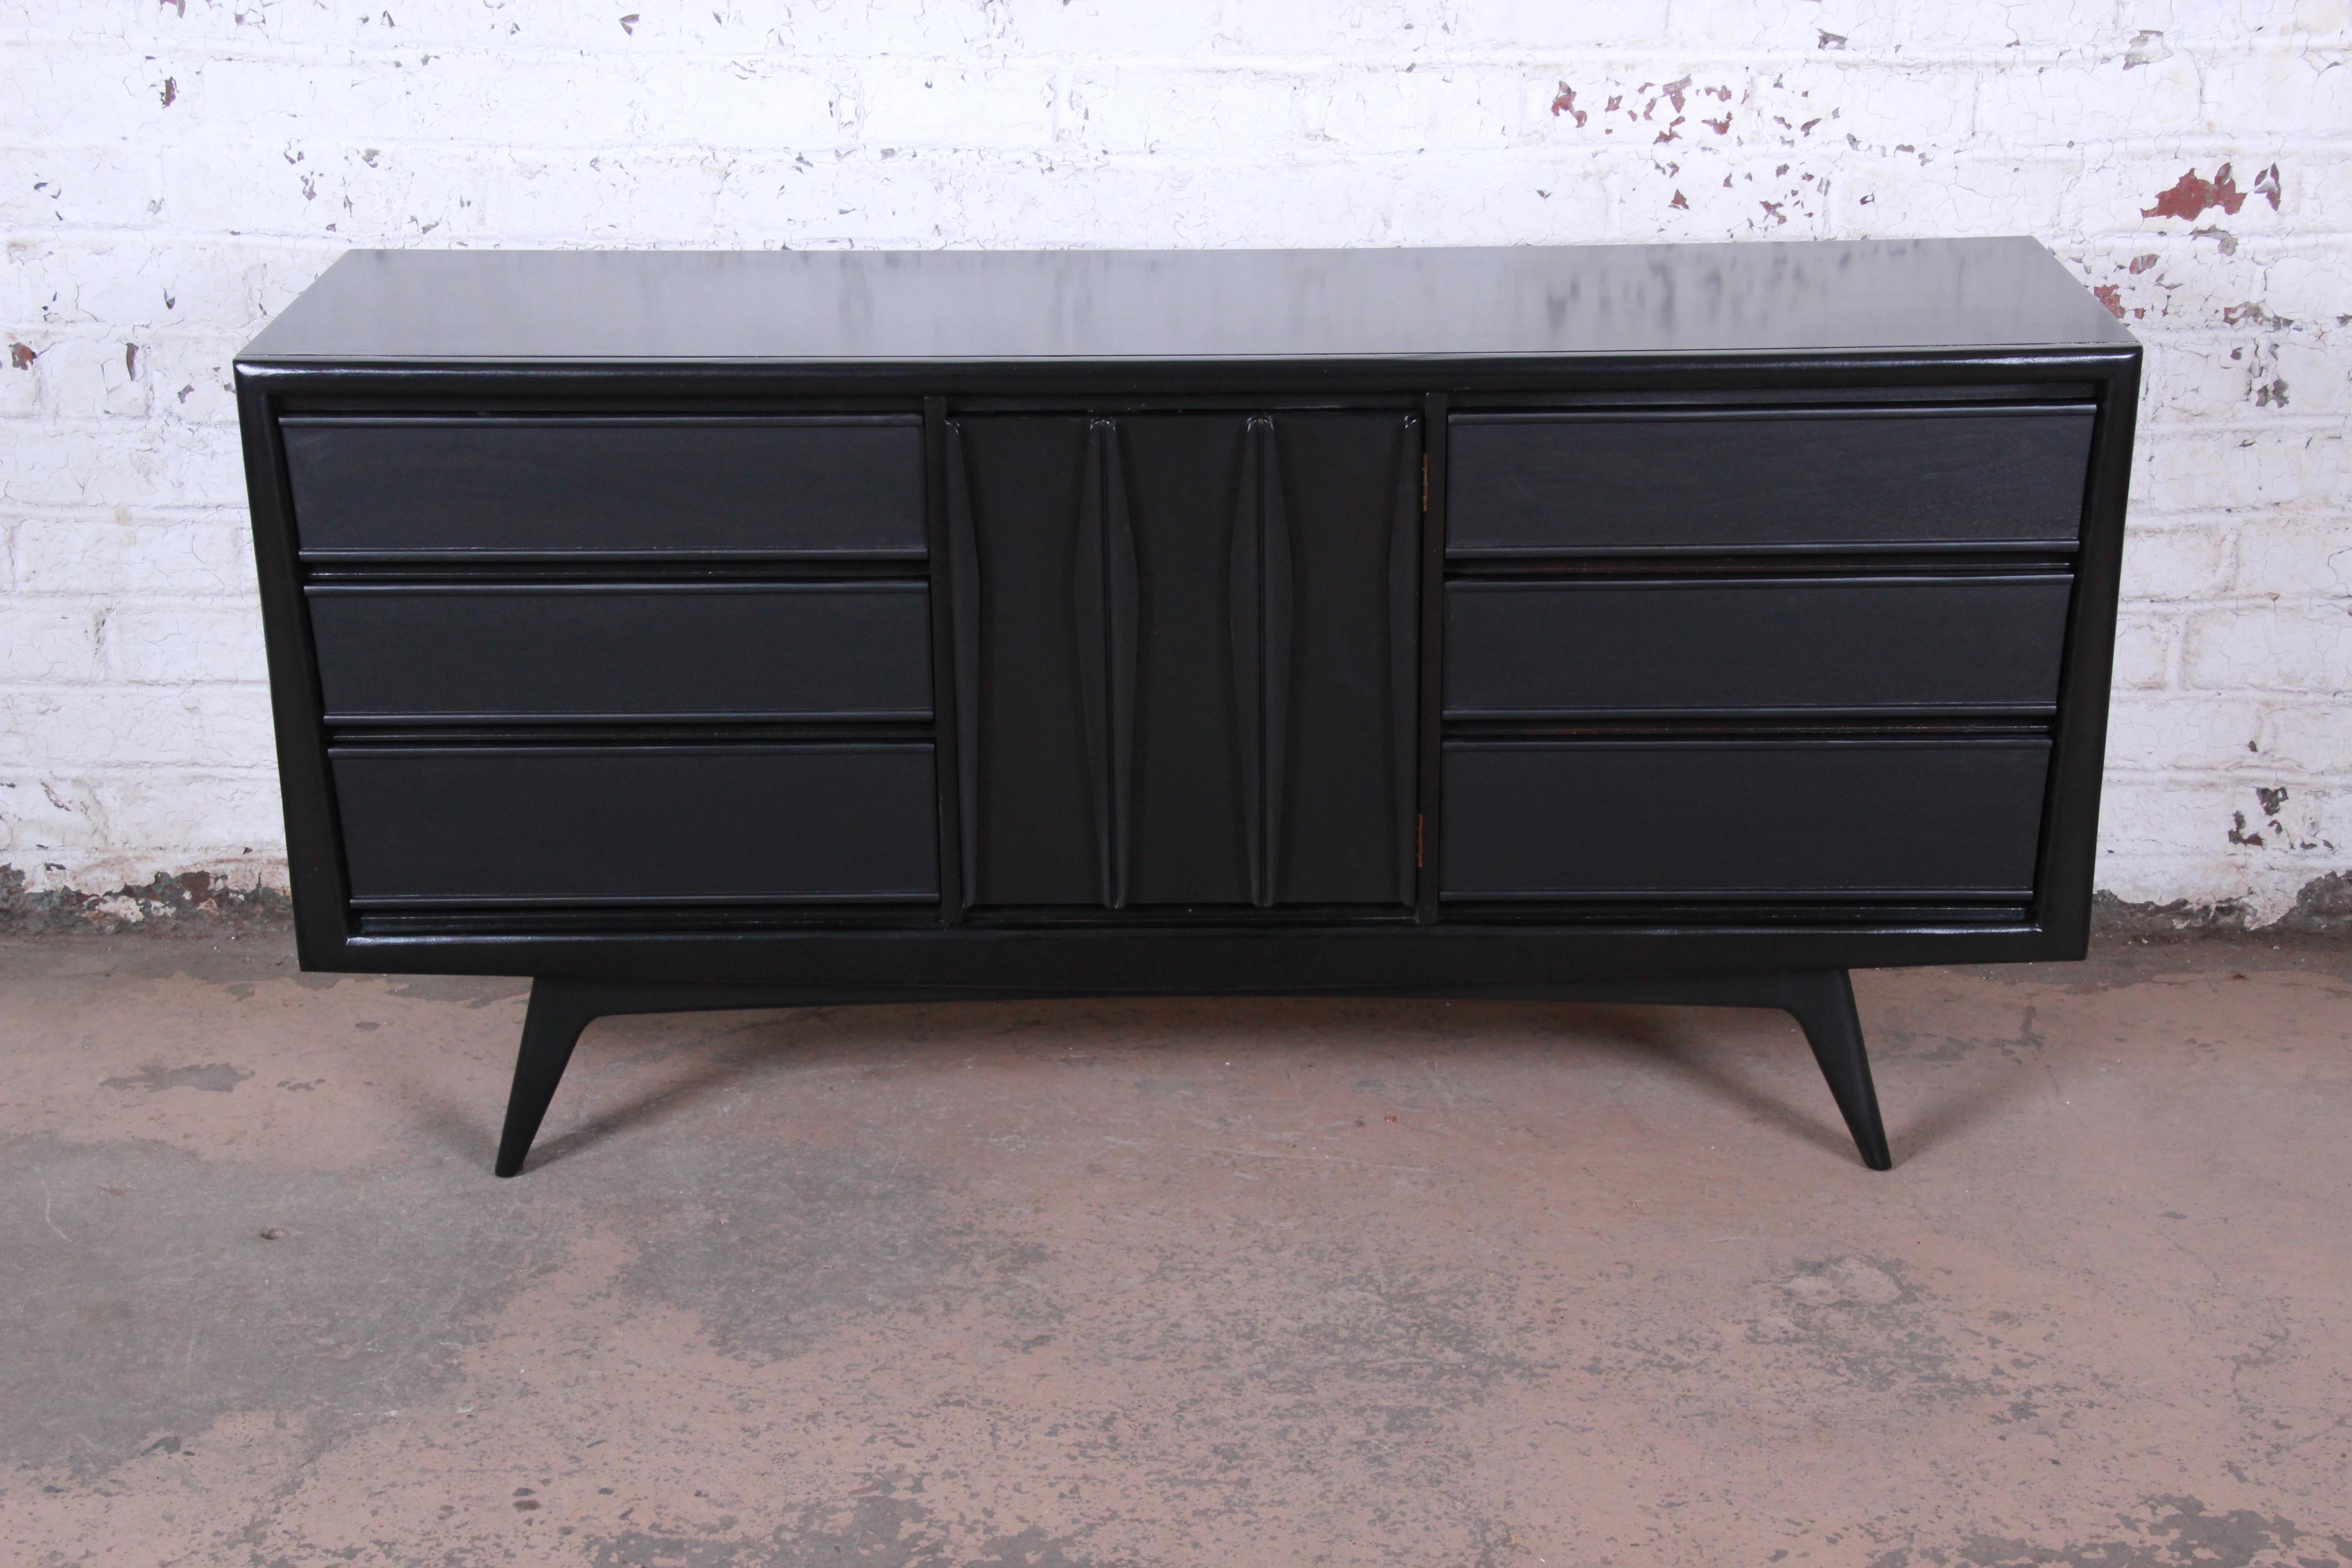 A gorgeous Mid-Century Modern sculpted walnut triple dresser or credenza by United Furniture. The dresser features beautiful walnut wood grain with a newly ebonized finish and sleek Mid-Century Modern design. It offers ample storage, with nine